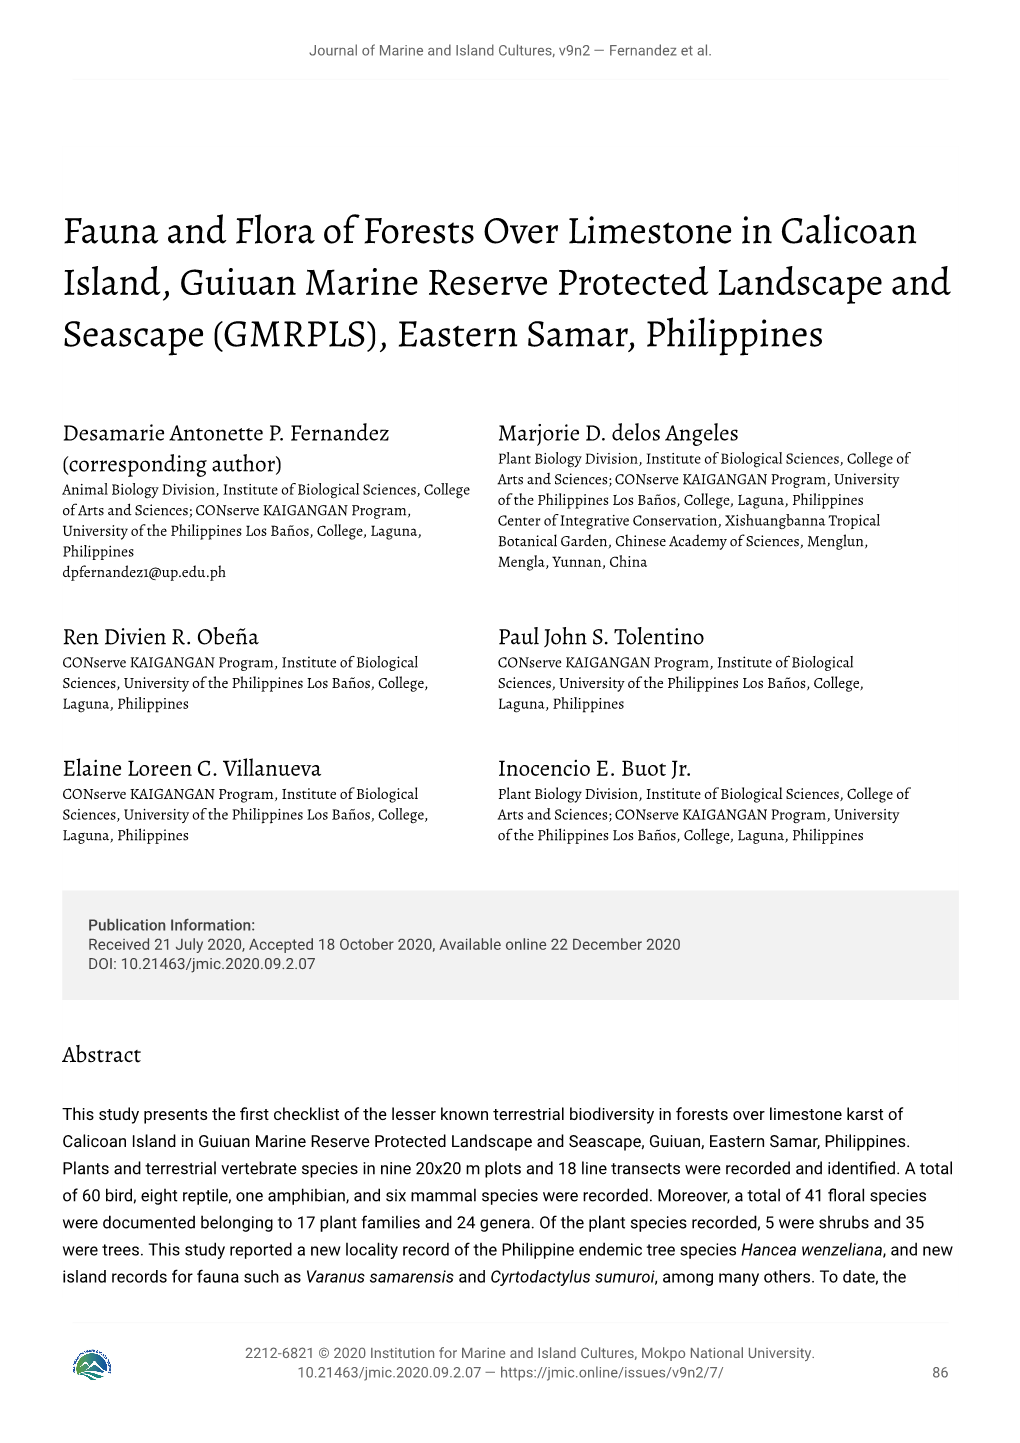 Fauna and Flora of Forests Over Limestone in Calicoan Island, Guiuan Marine Reserve Protected Landscape and Seascape (GMRPLS), Eastern Samar, Philippines